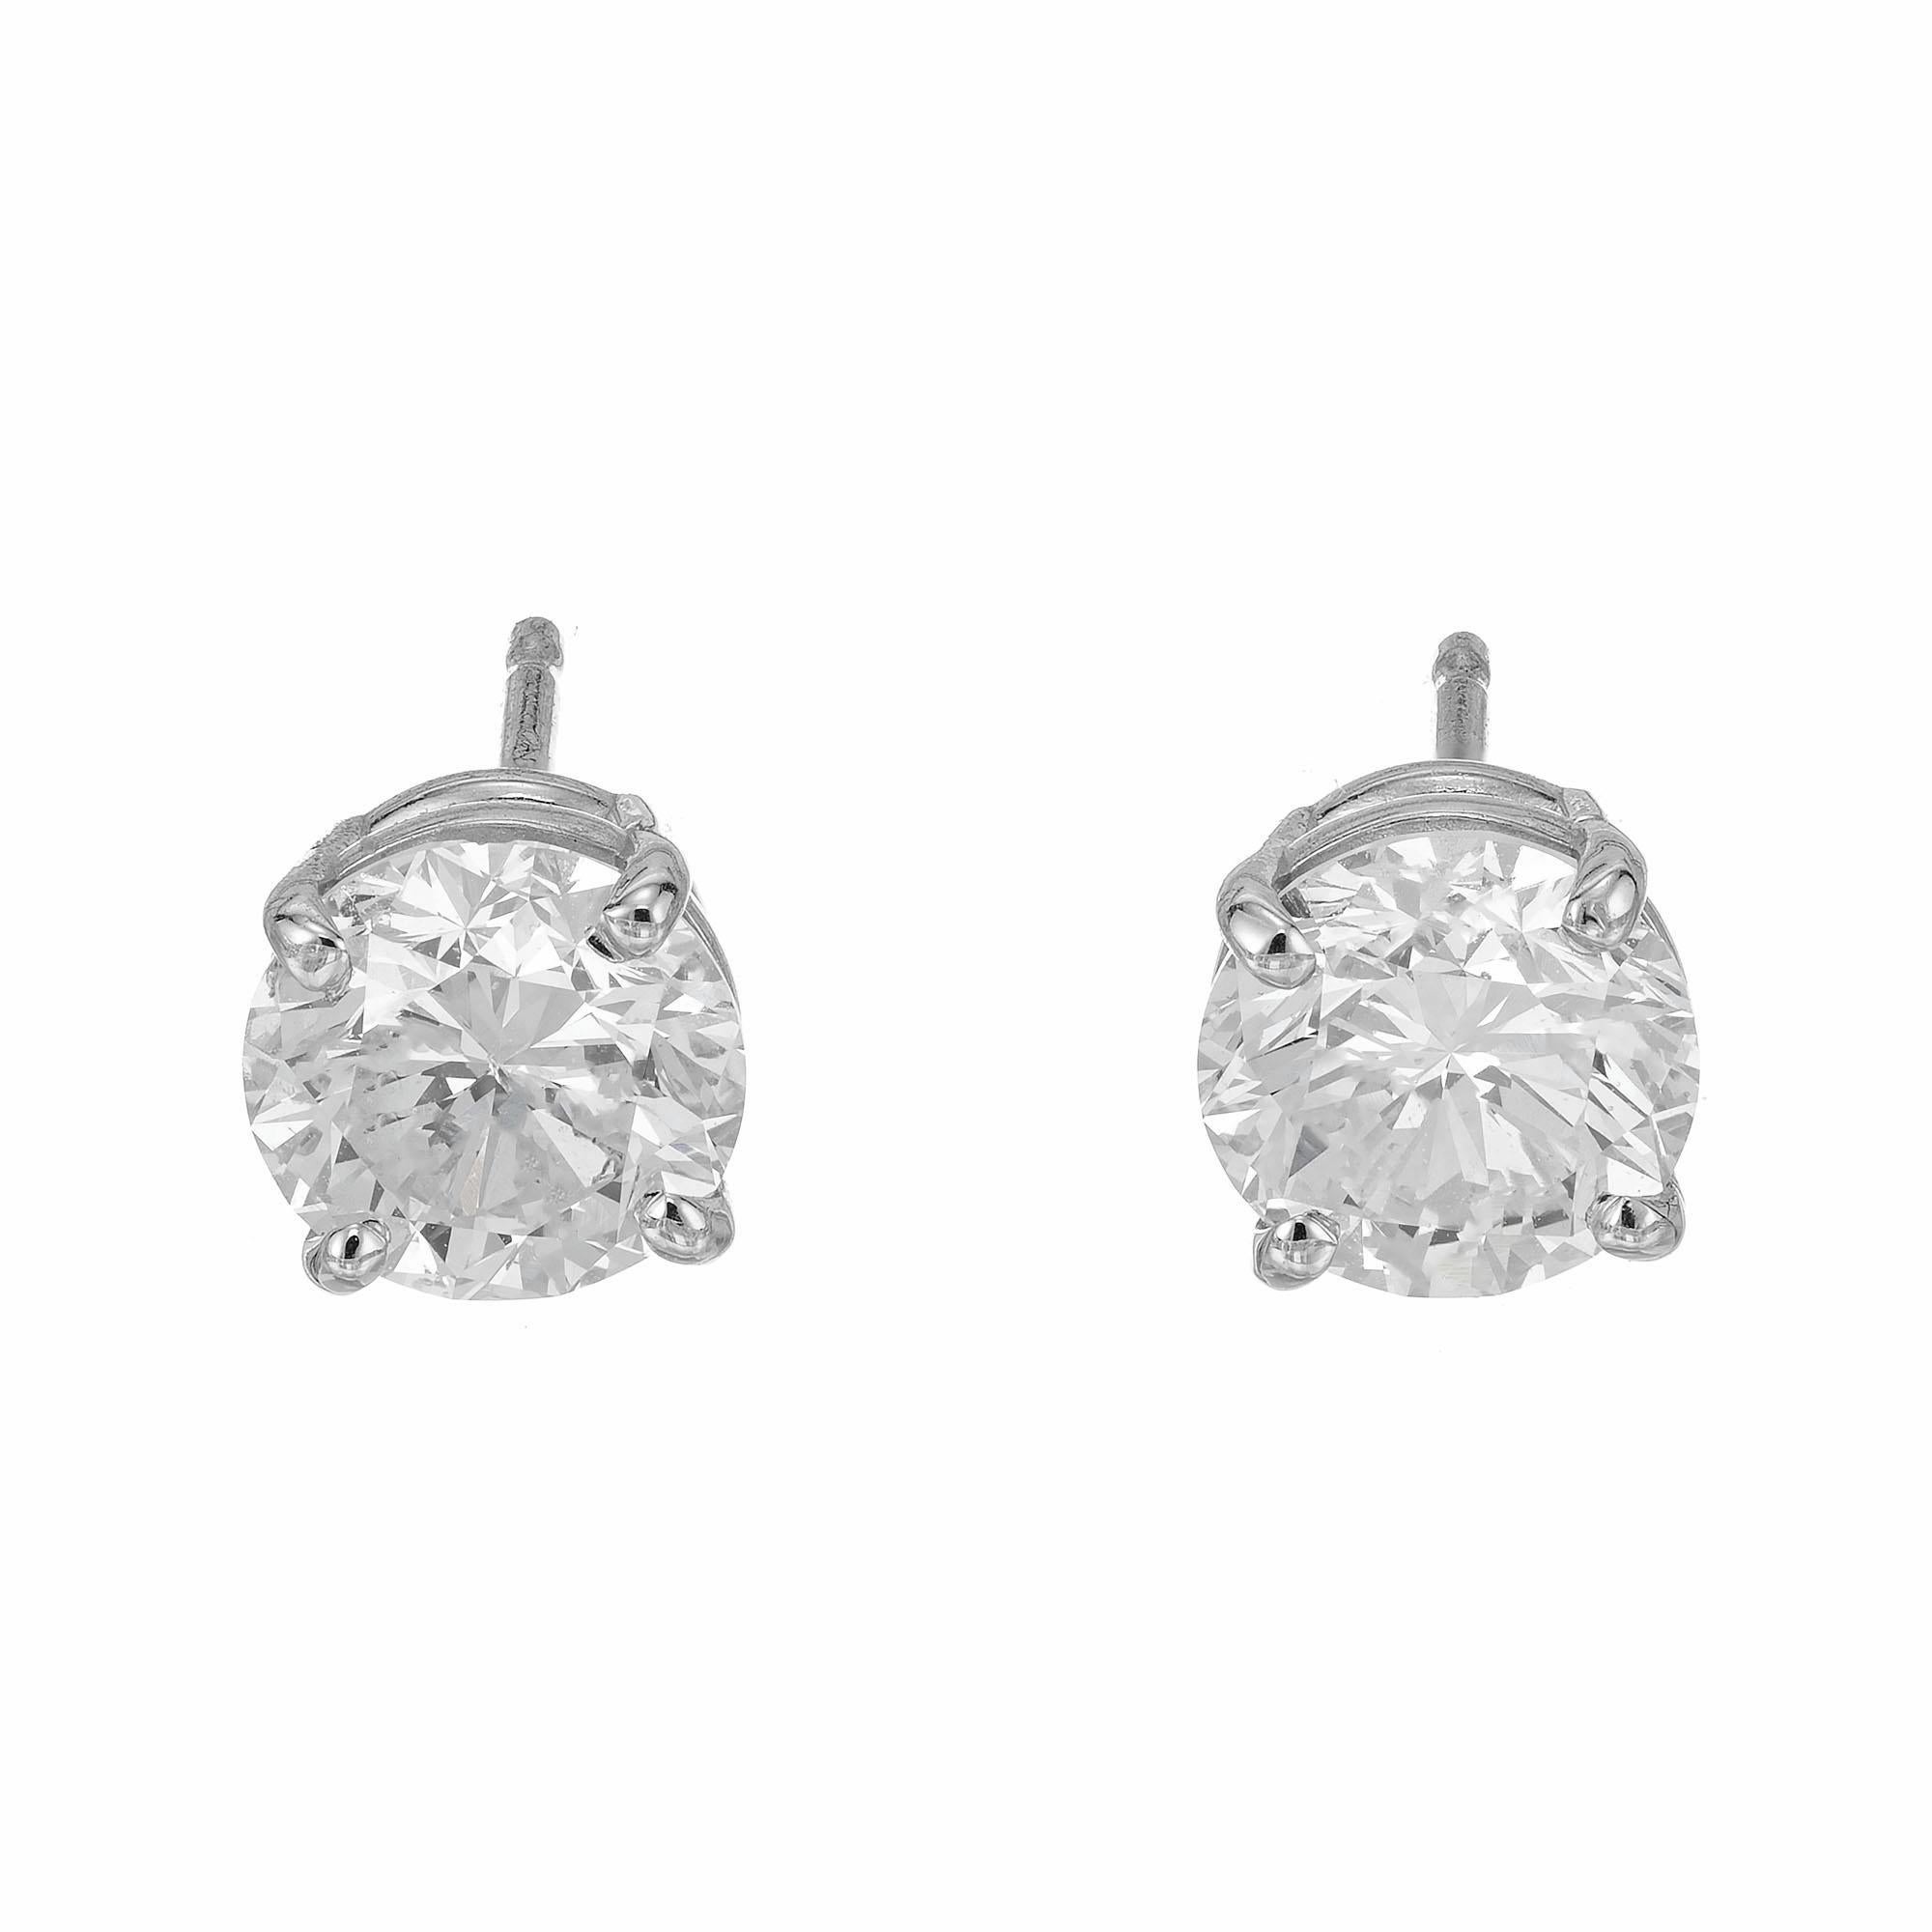 Peter Suchy 1.42 Carat Diamond Platinum Stud Earrings In New Condition For Sale In Stamford, CT